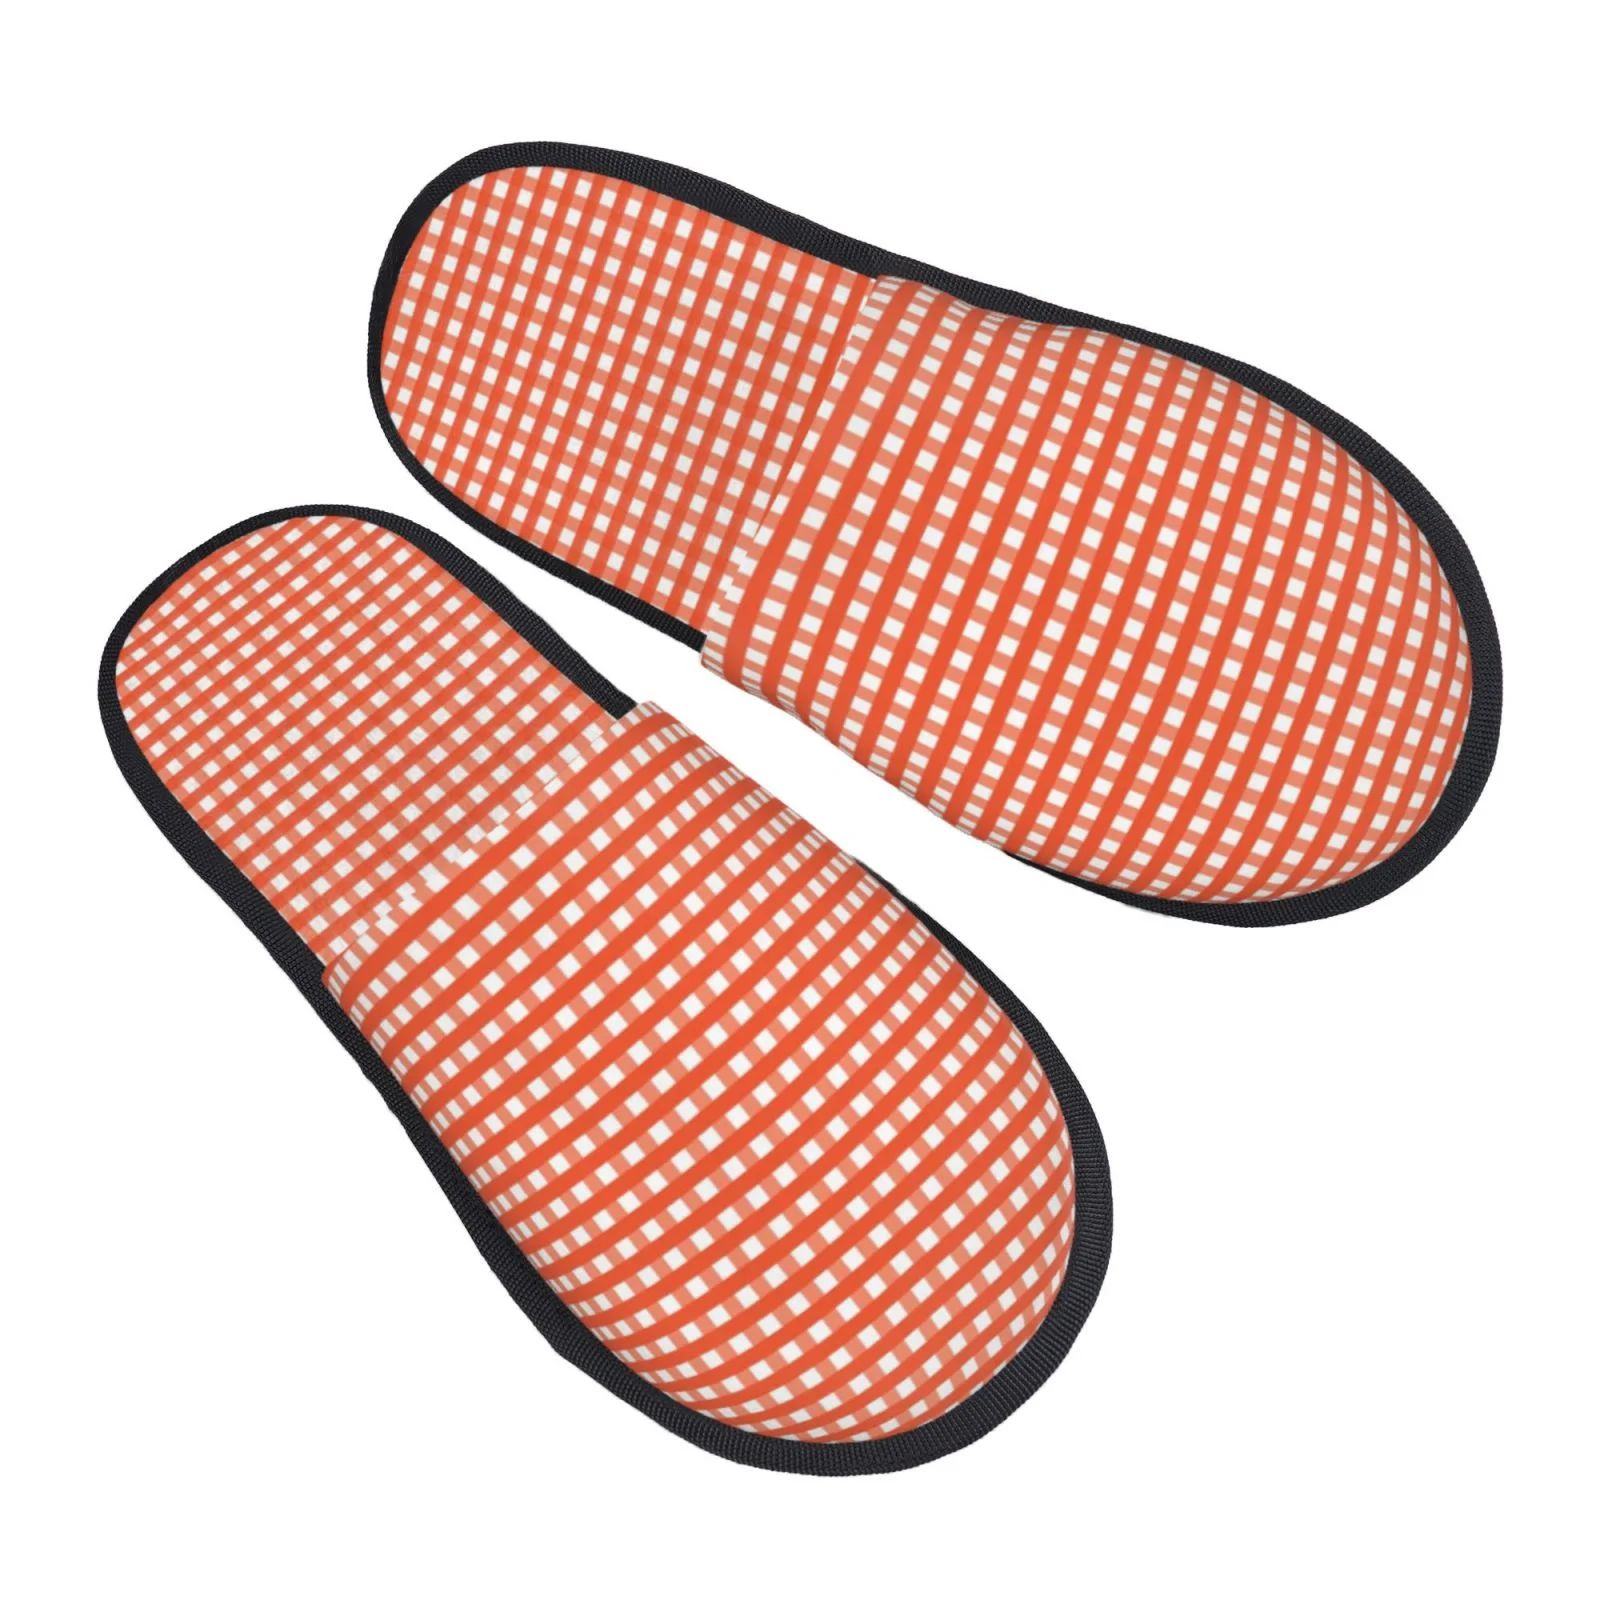 Bingfone Orange Gingham House Slippers For Women Men With Soft Rubber Sole Slip On For Indoor/Out... | Walmart (US)